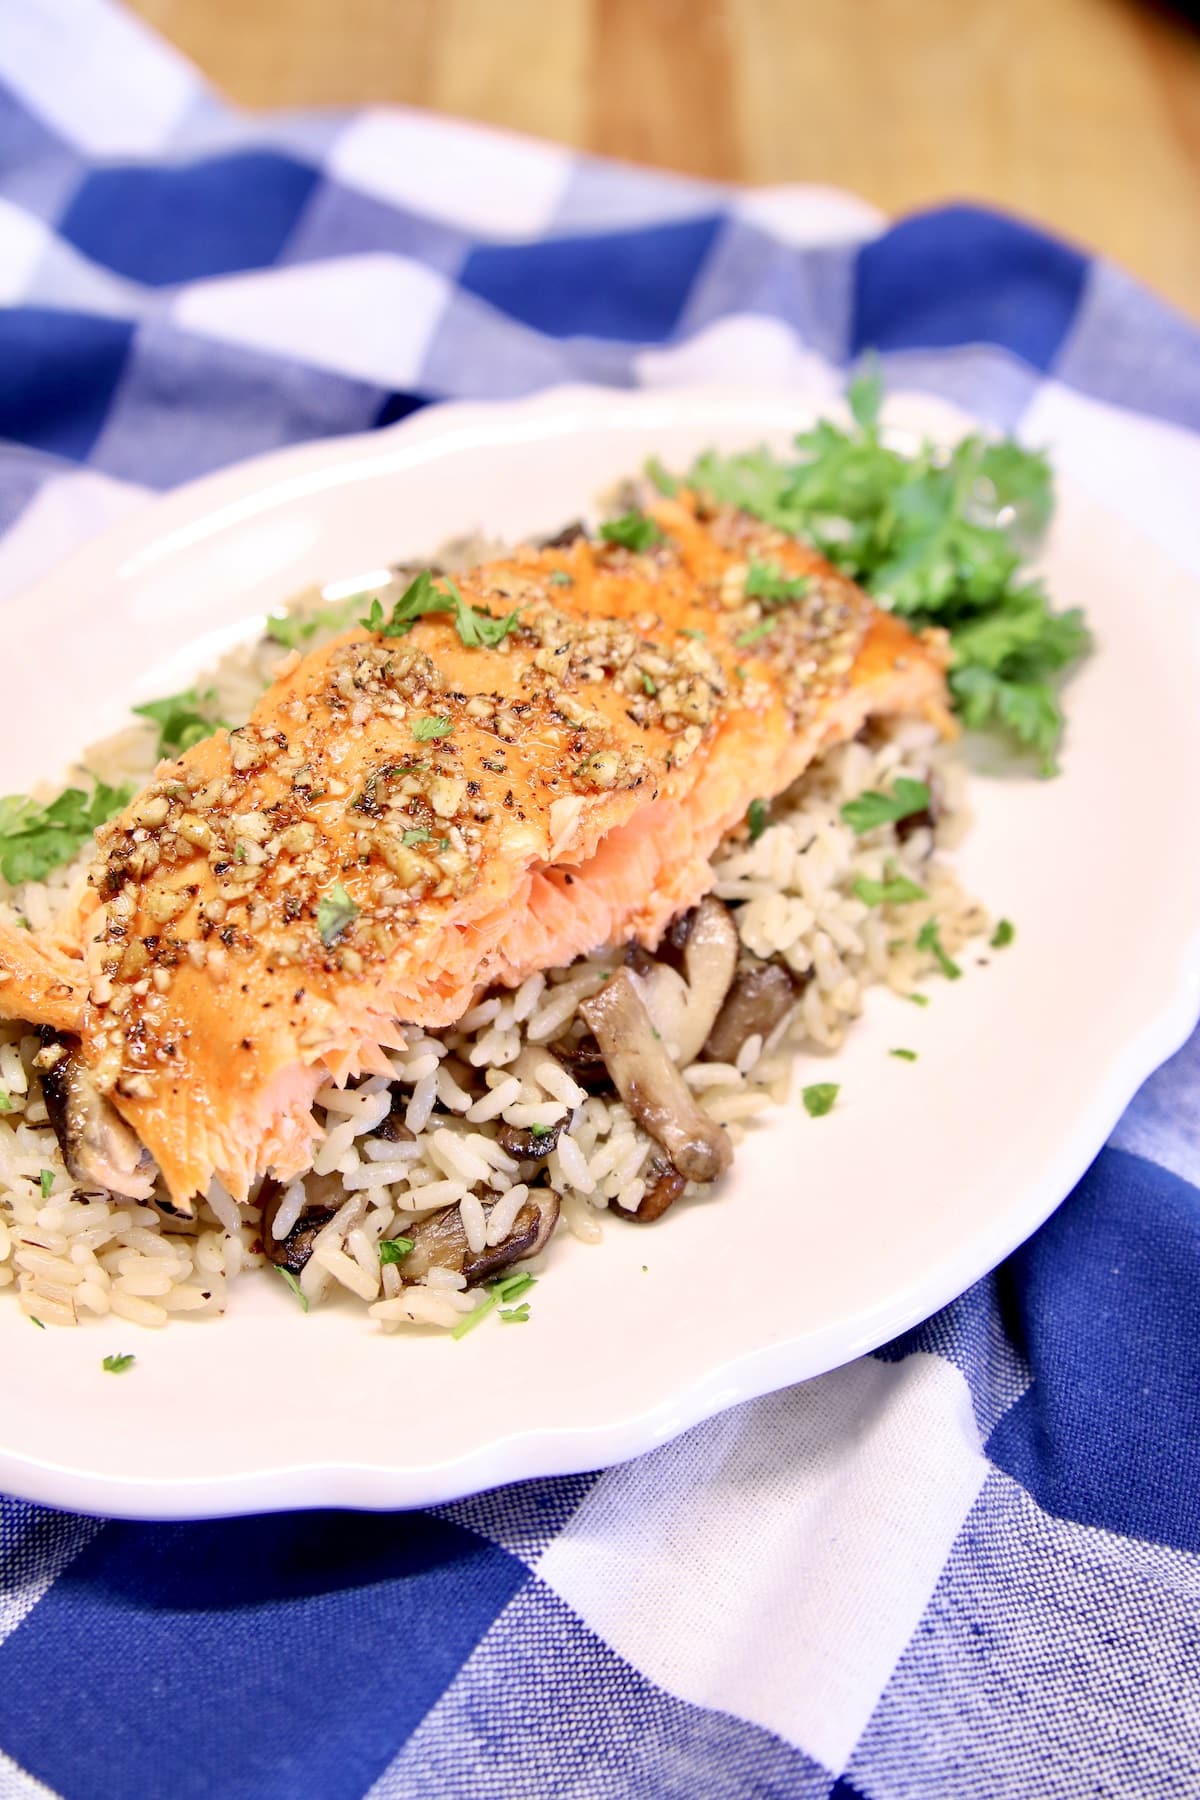 Plate with rice pilaf and honey pecan salmon filet.